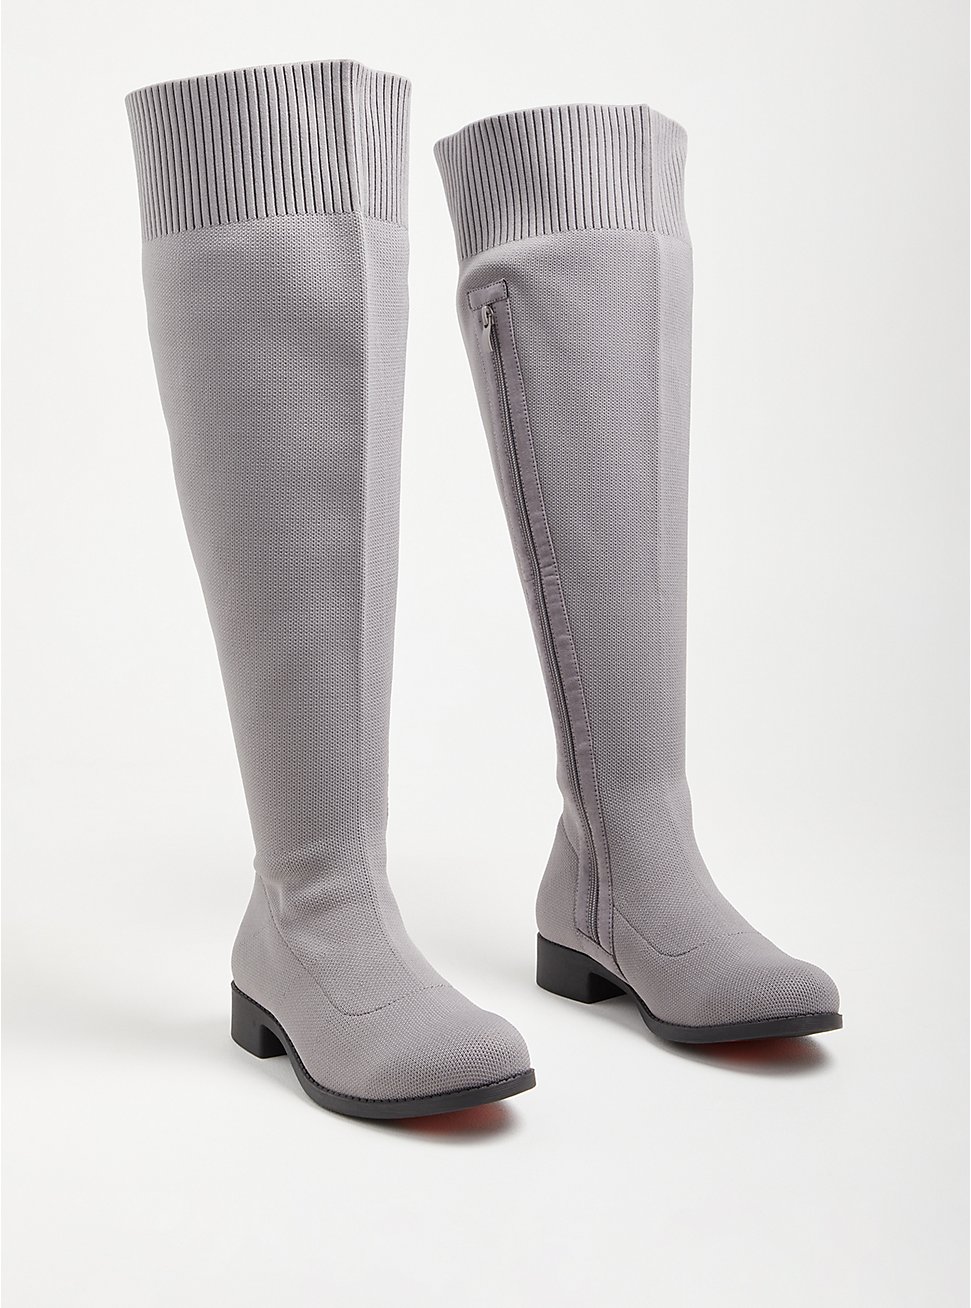 Plus Size Stretch Knit Over The Knee Boot - Grey (WW), BURGUNDY, hi-res